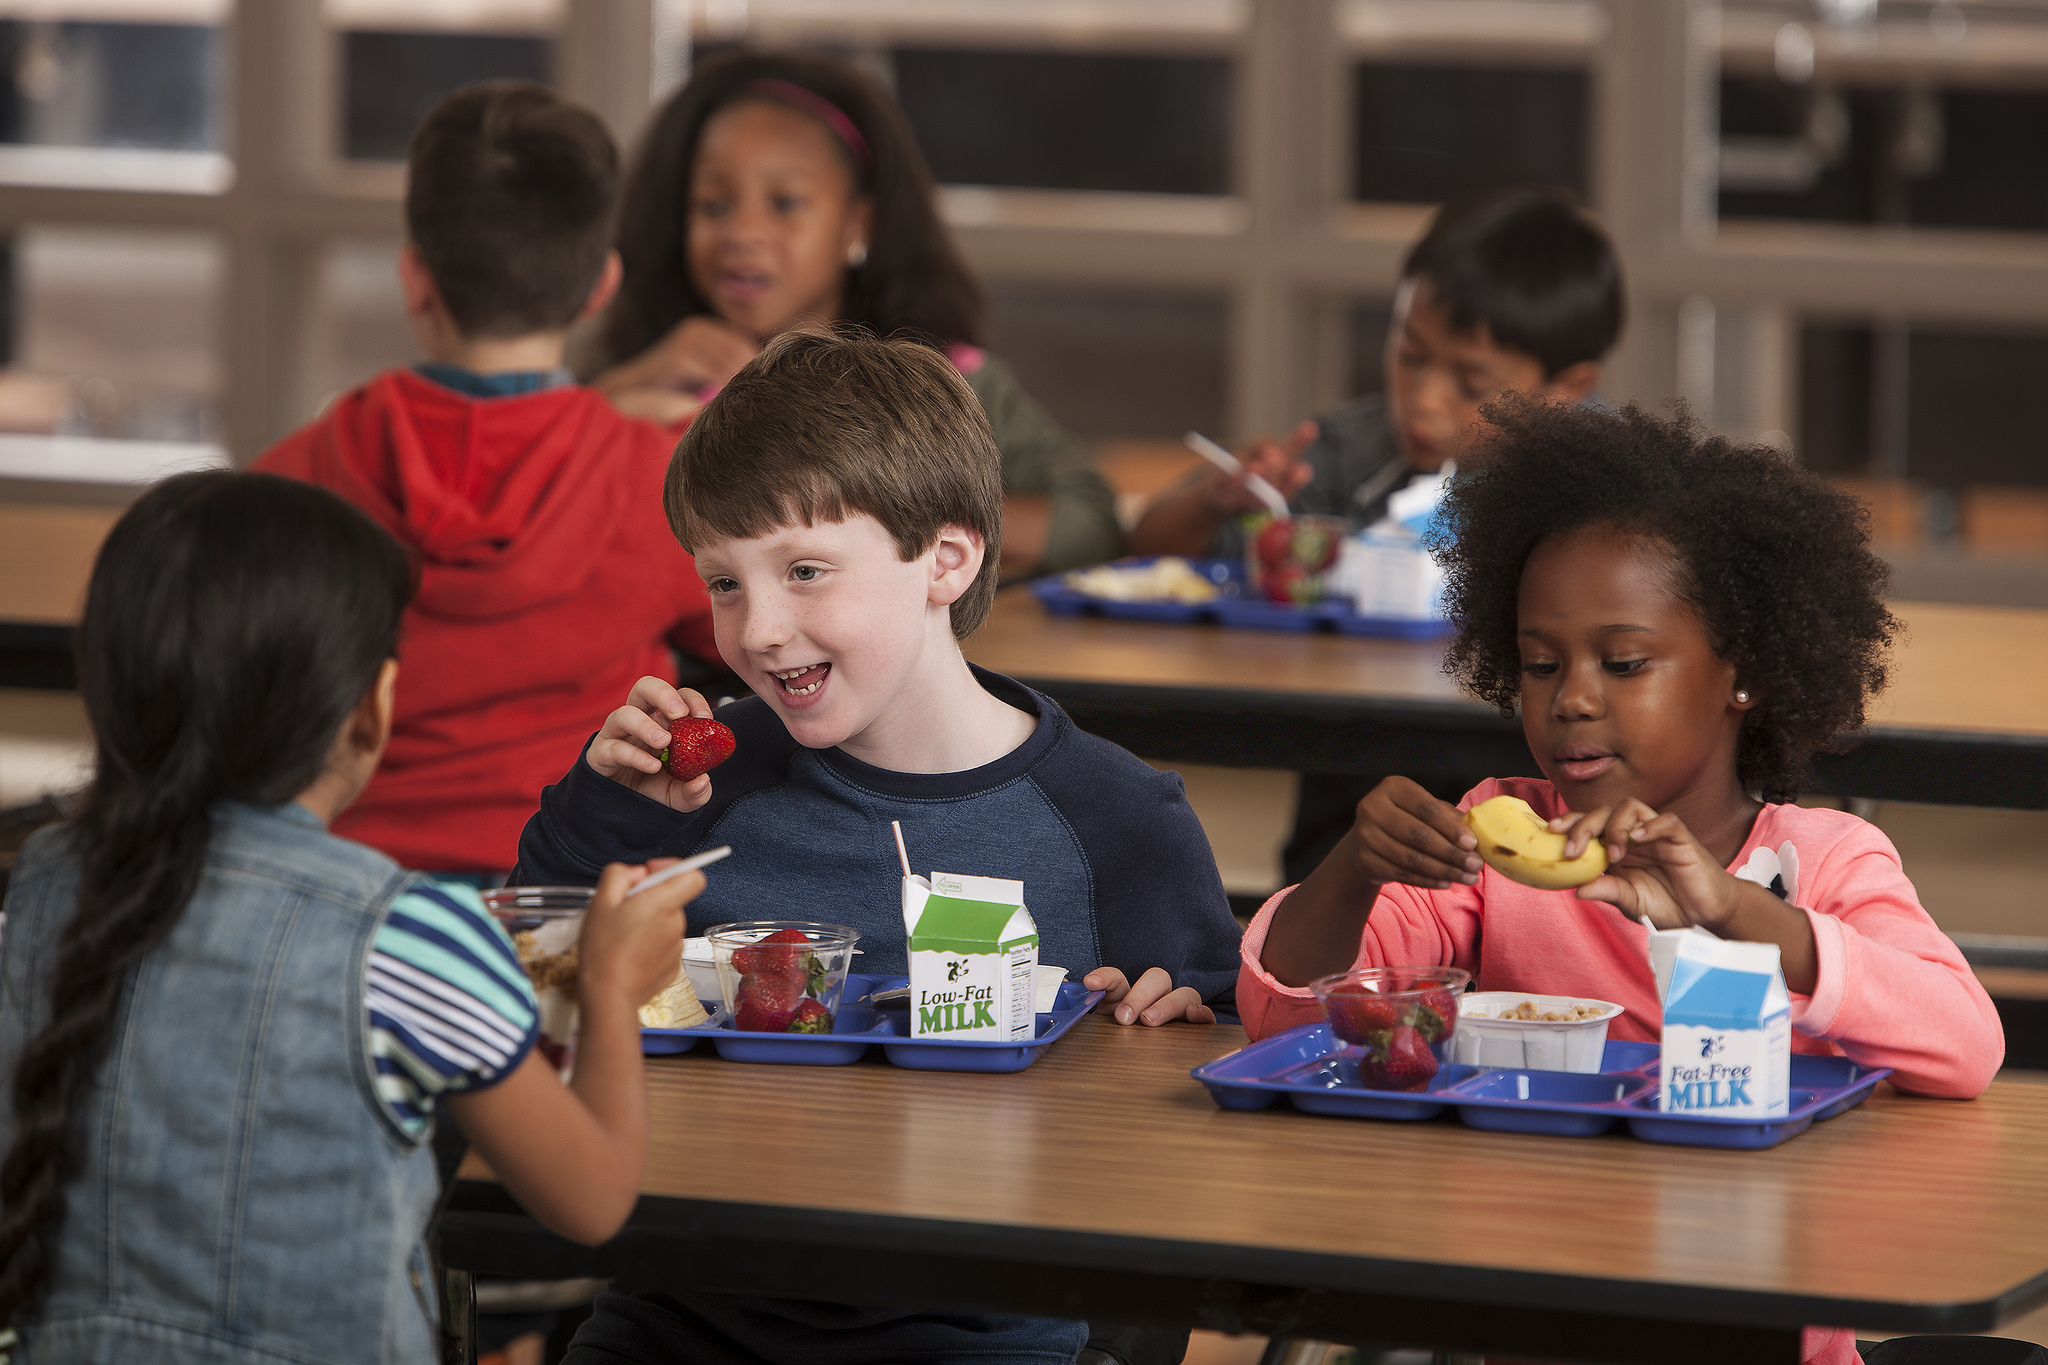 Three Ways to Get Students to Buy More School Lunches